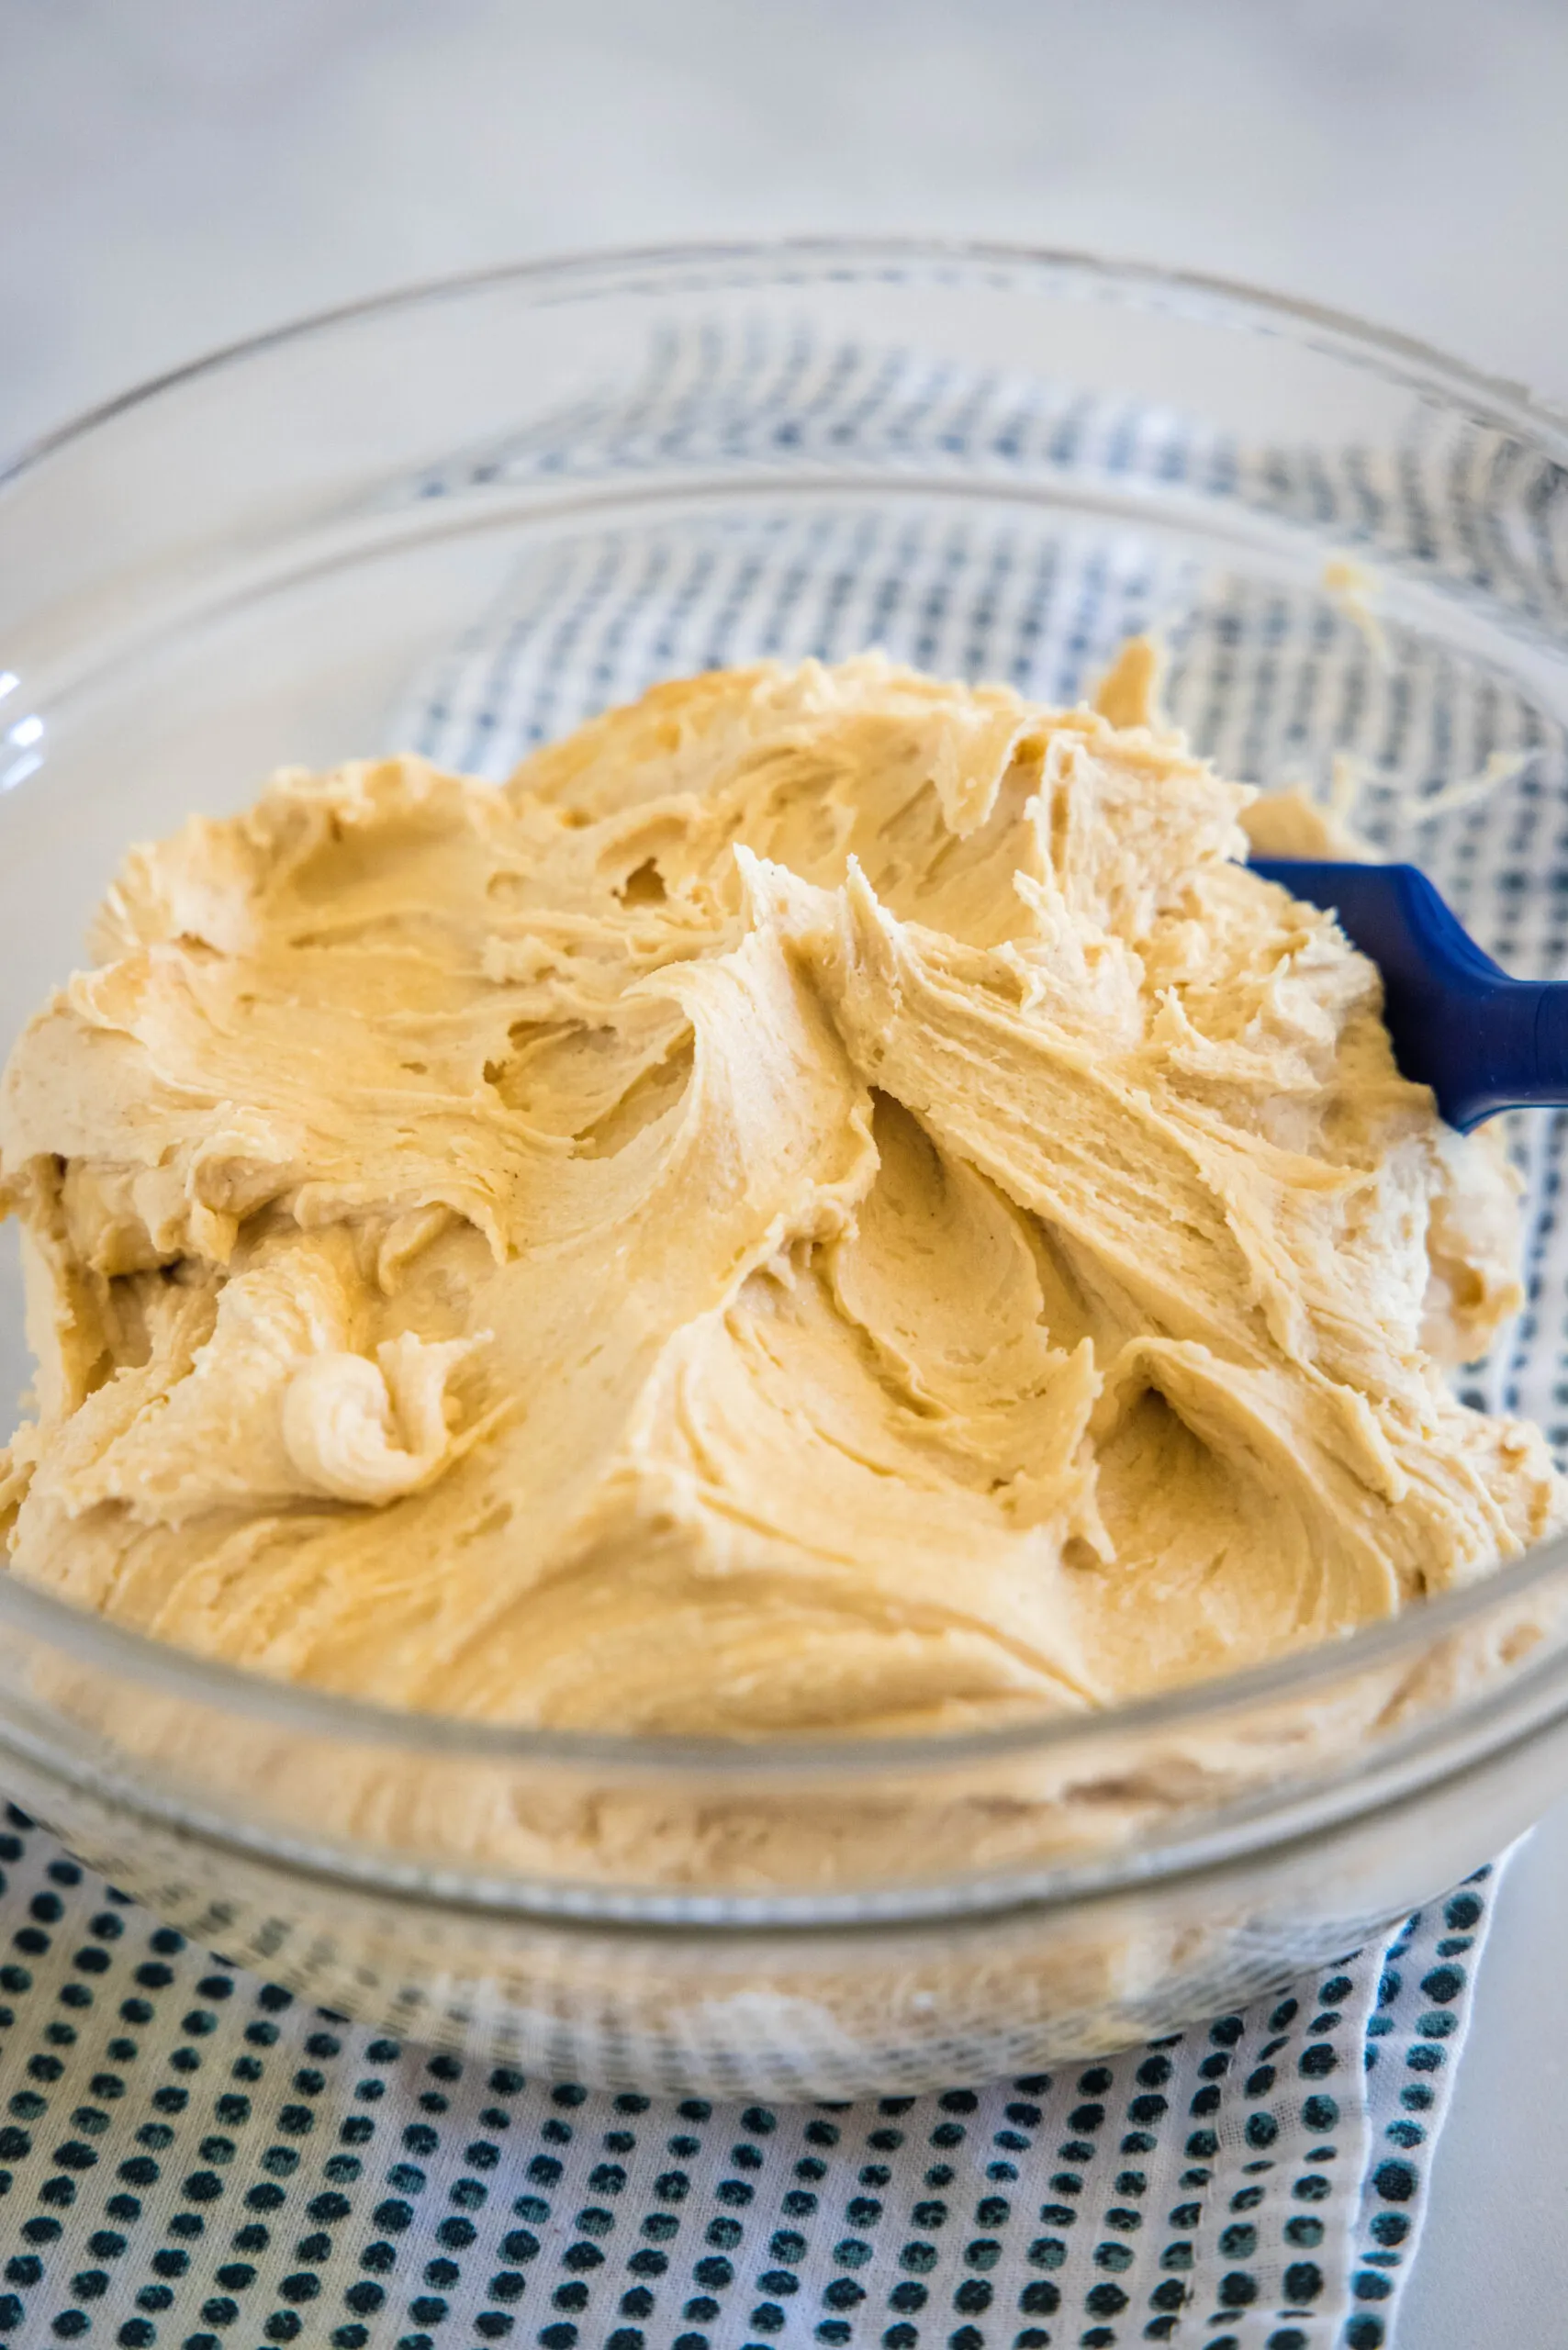 Peanut butter frosting in a glass bowl with a blue stirring spoon.